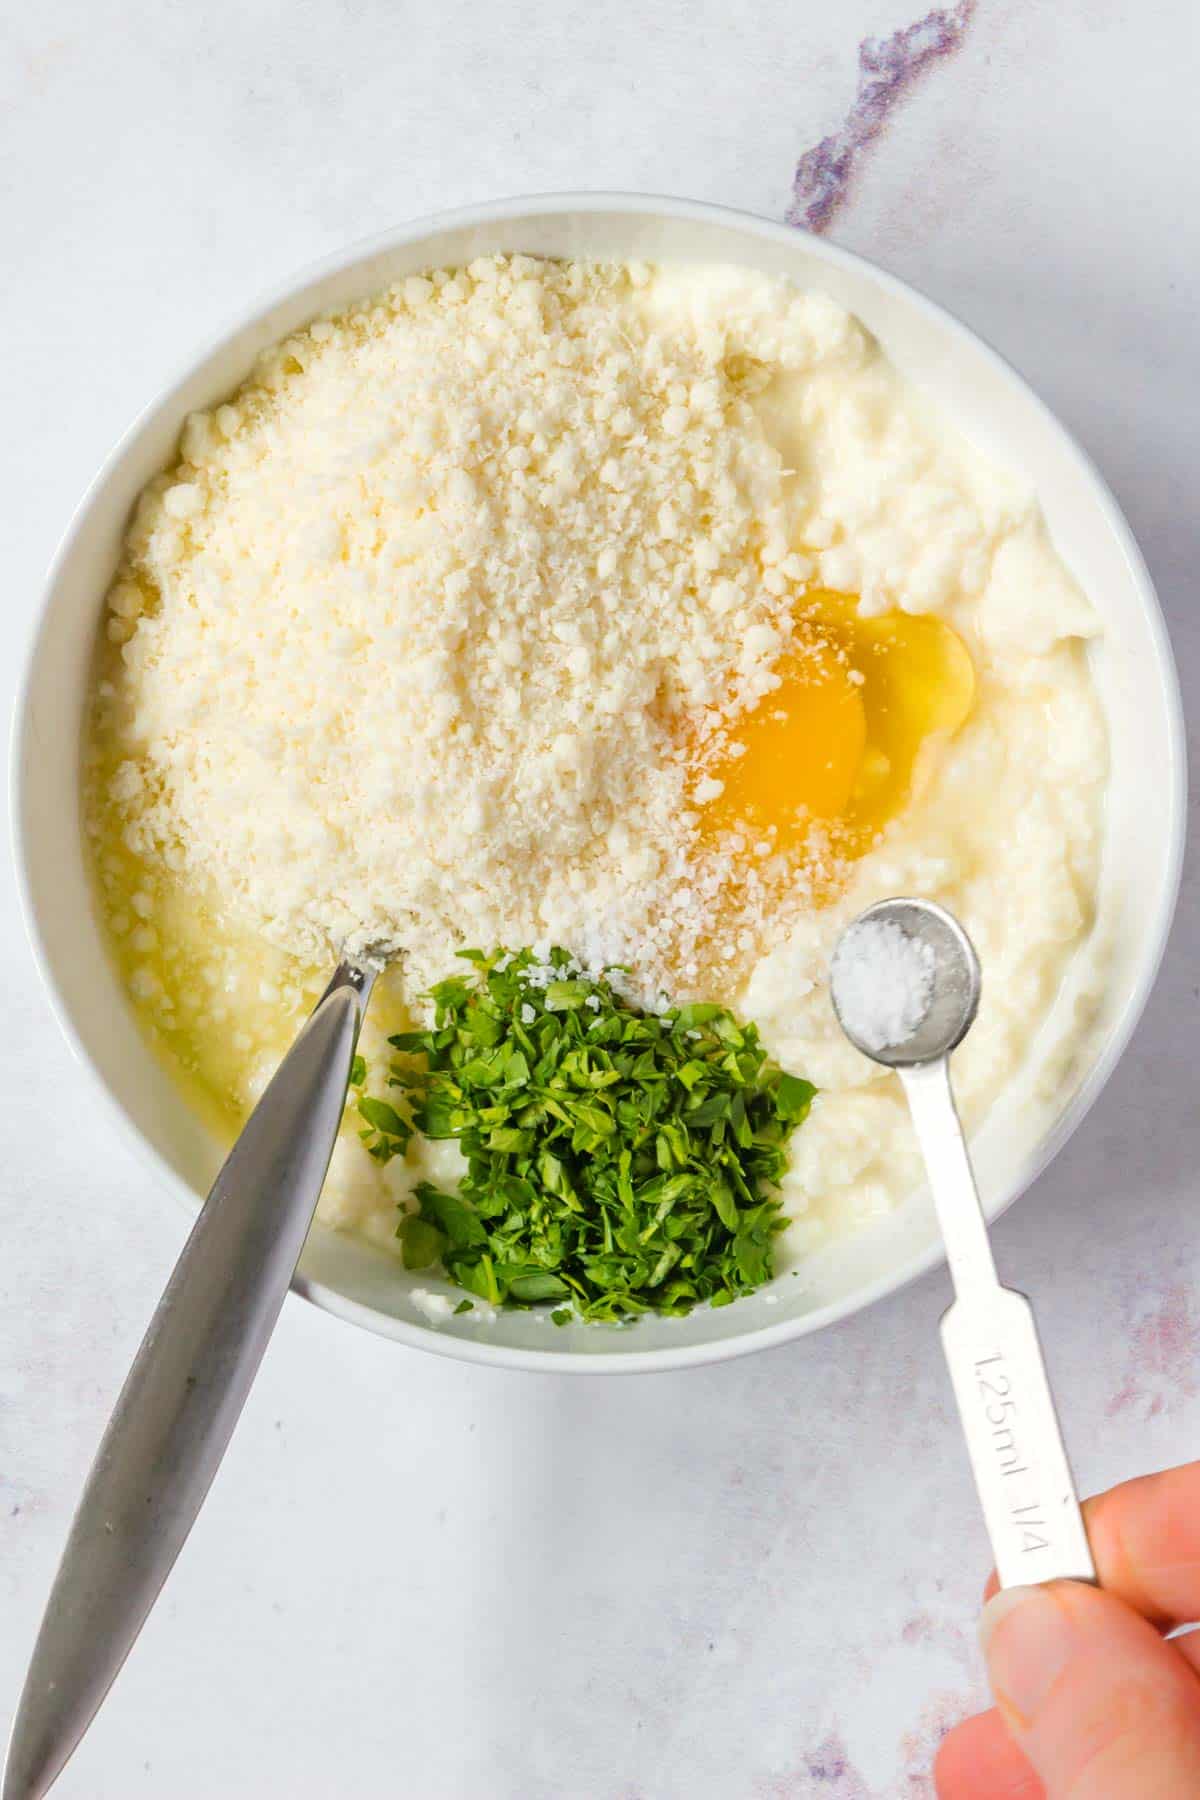 Parmesan cheese, an egg, chopped parsley and the remaining ingredients for the ricotta filling inside of a bowl